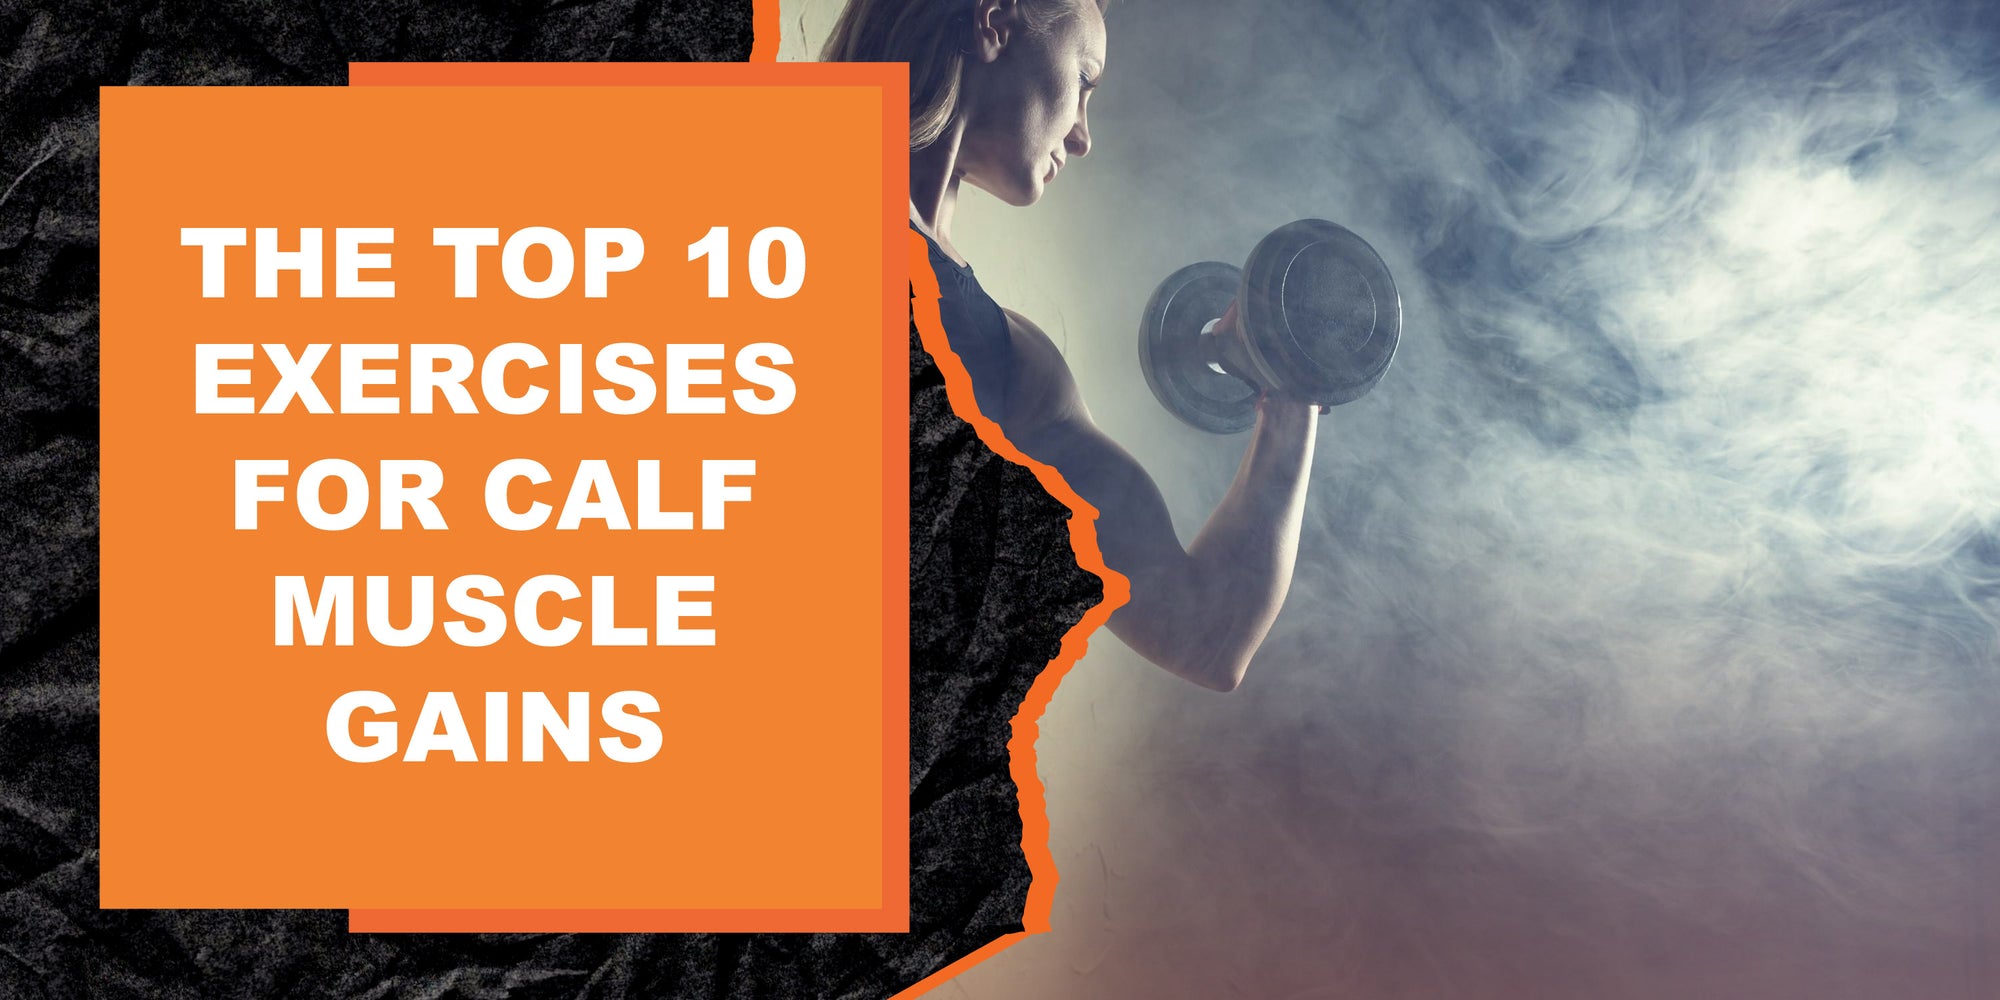 The Top 10 Exercises for Calf Muscle Gains